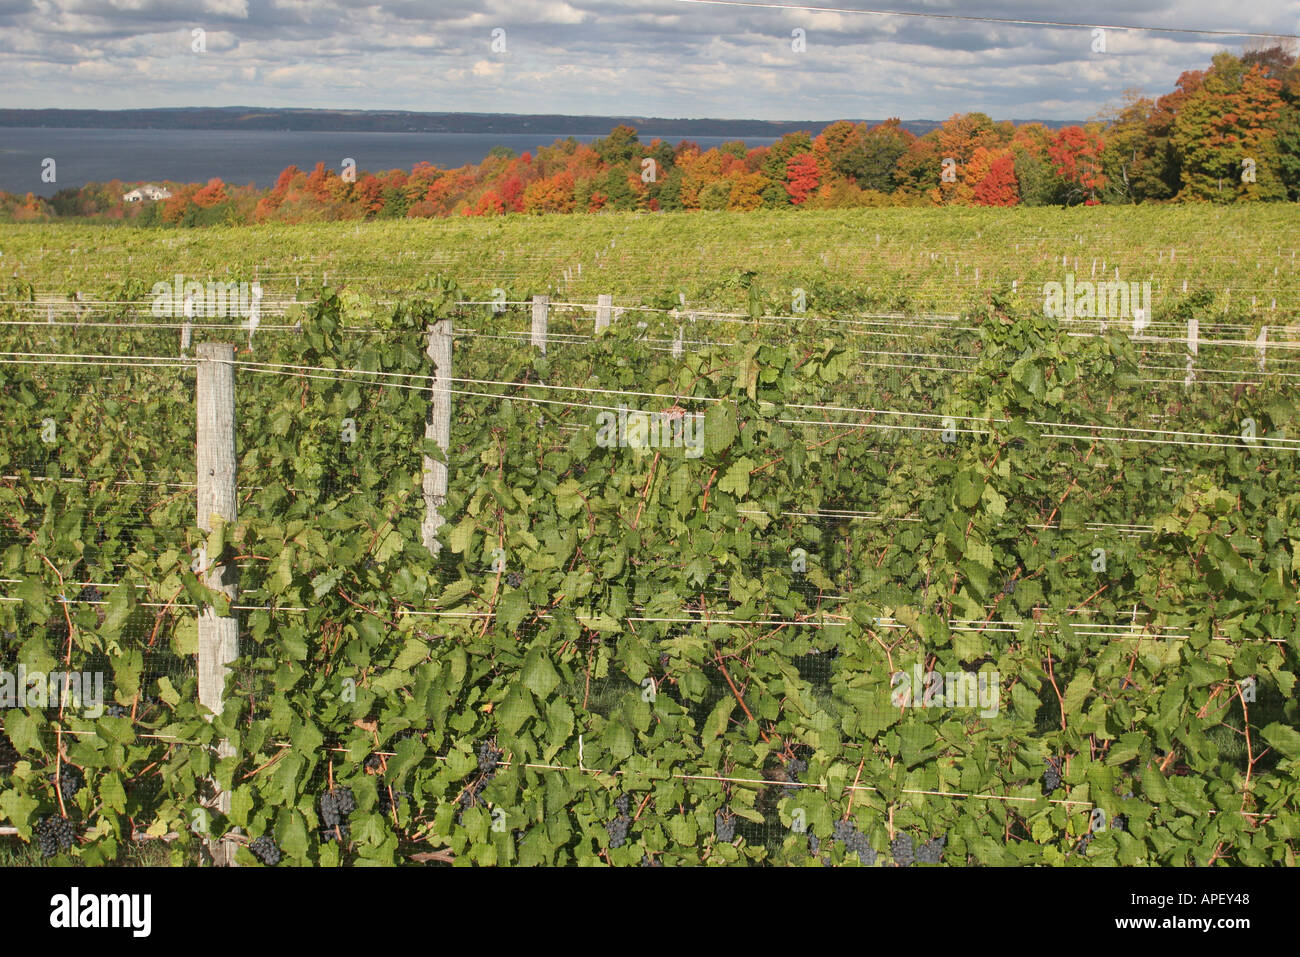 Michigan, MI, Mich, Upper Midwest, Old Mission Peninsula, Traverse City, vineyard, vineyards, grape, growing, agriculture, rural, country, countryside Stock Photo